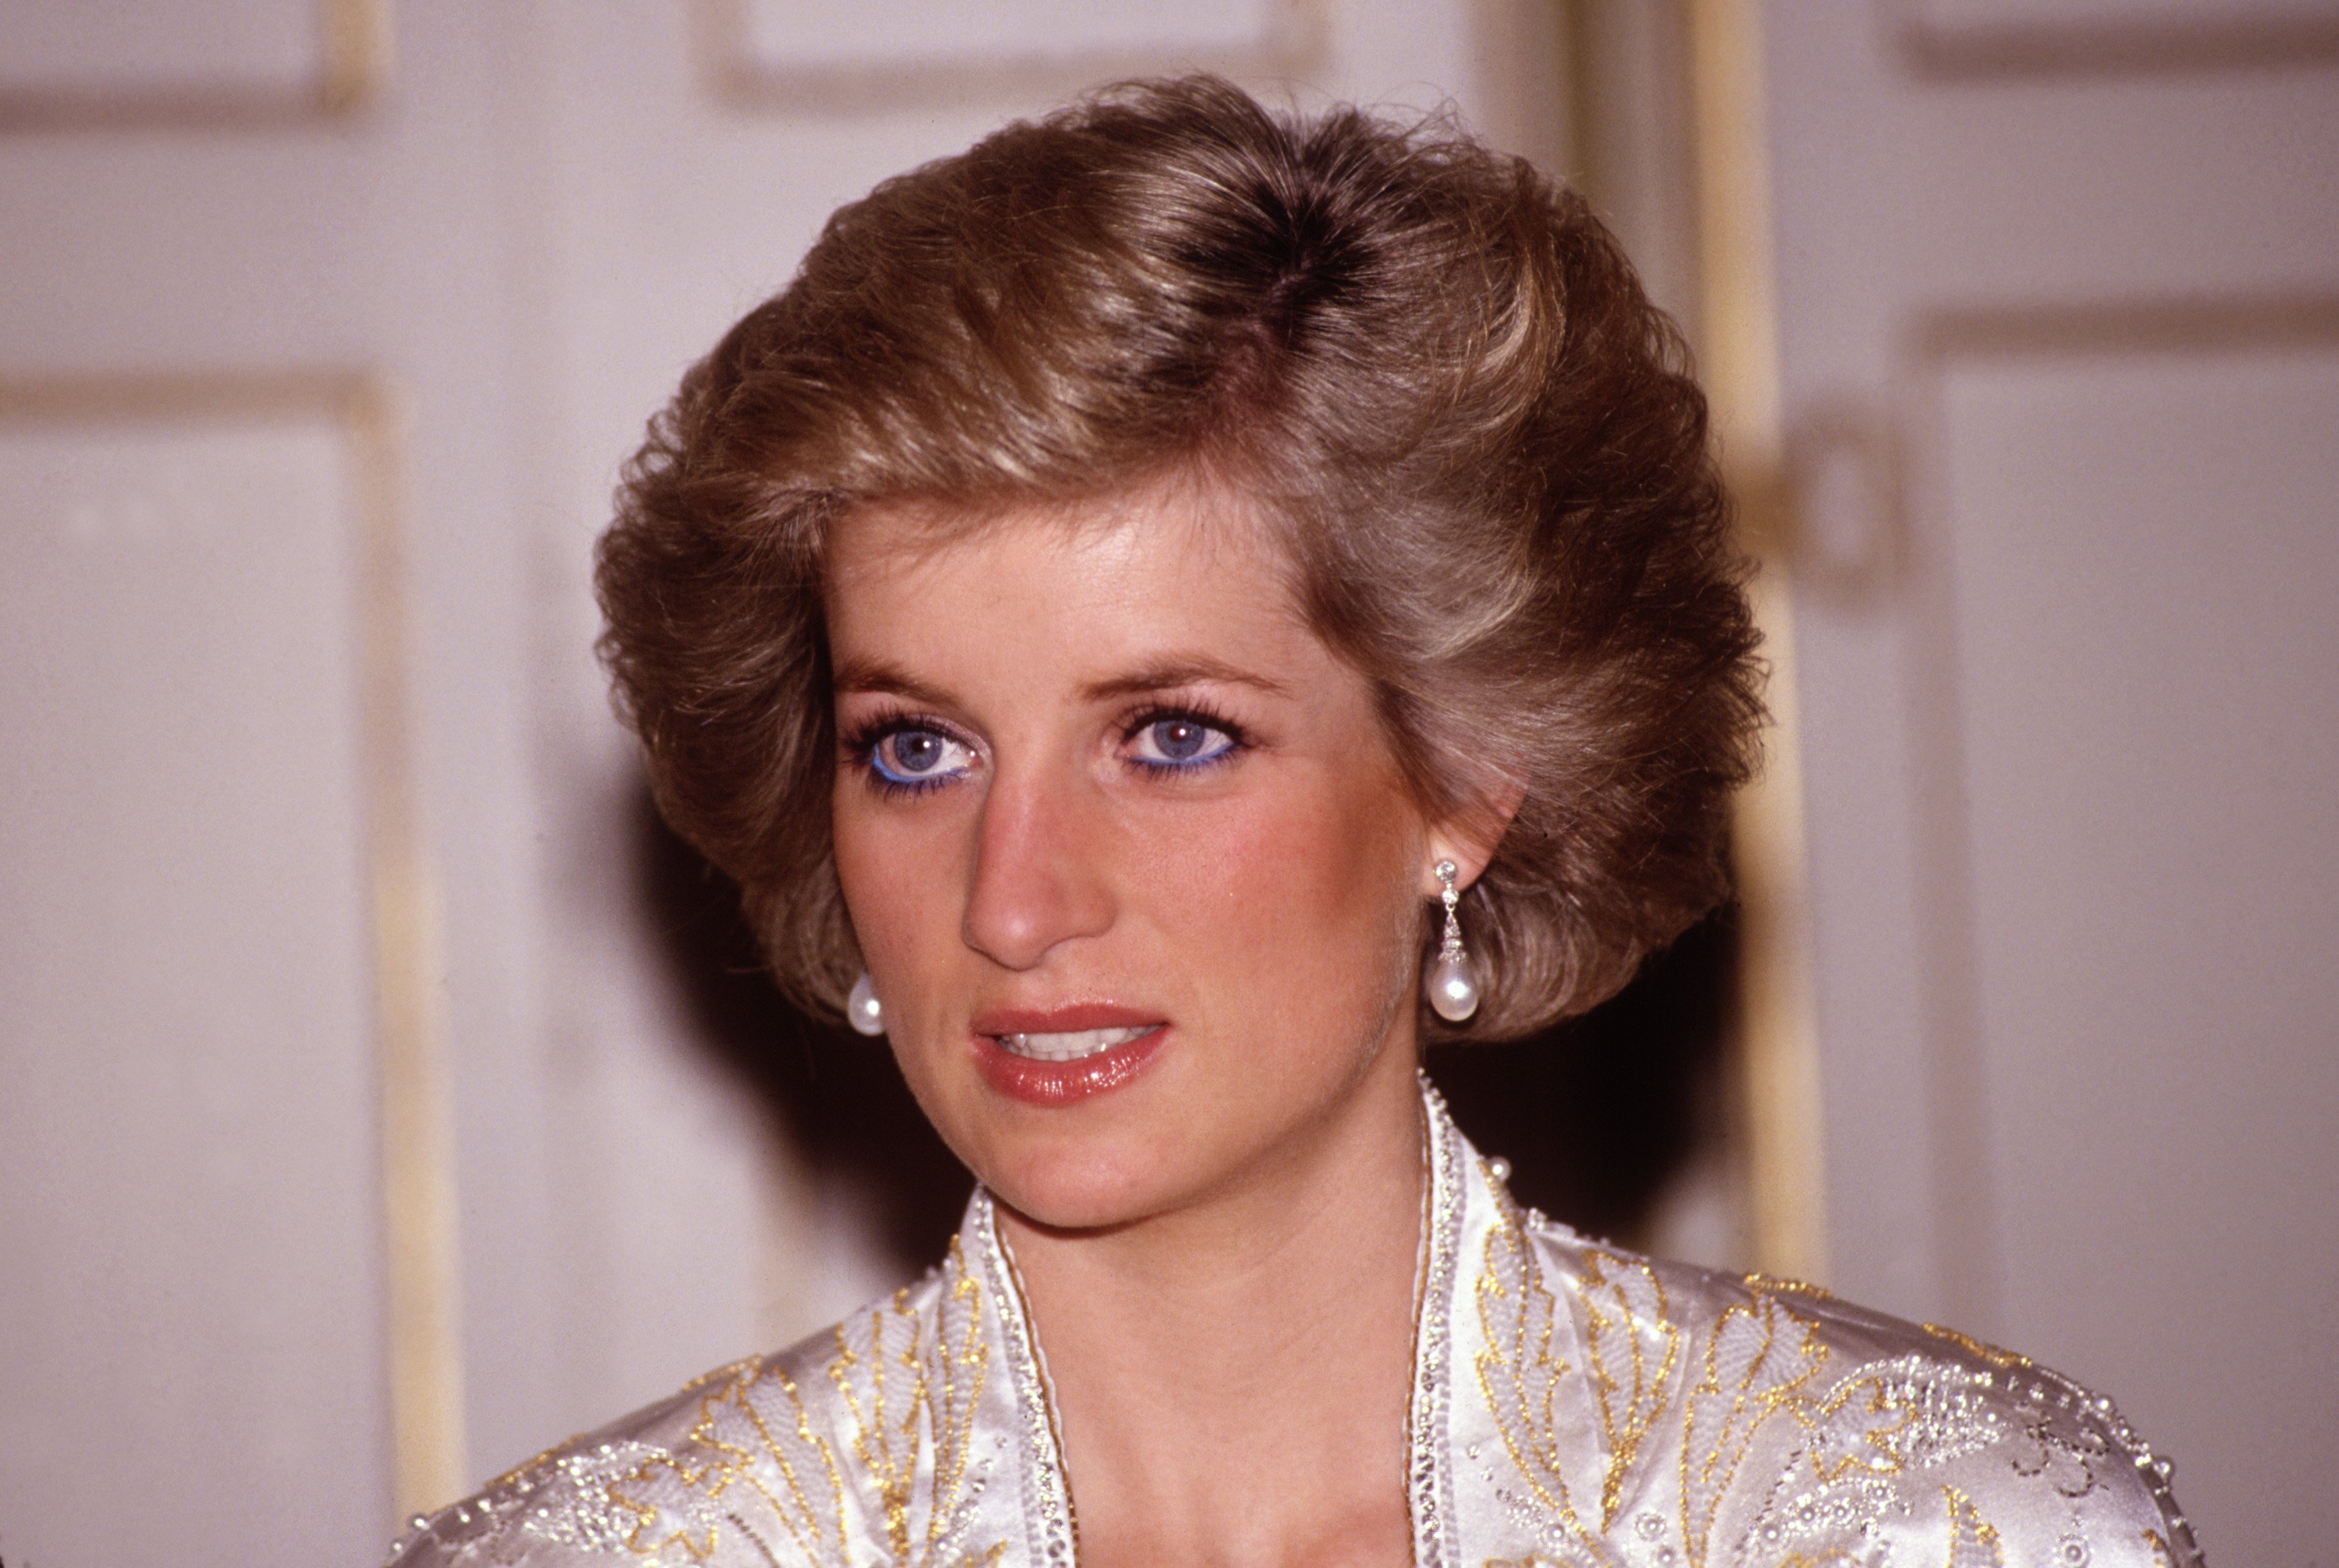 Princess of Wales at a dinner given by President Mitterand in November, 1988 at the Elysee Palace in Paris, France during the Royal Tour of France. | Source: Getty Images